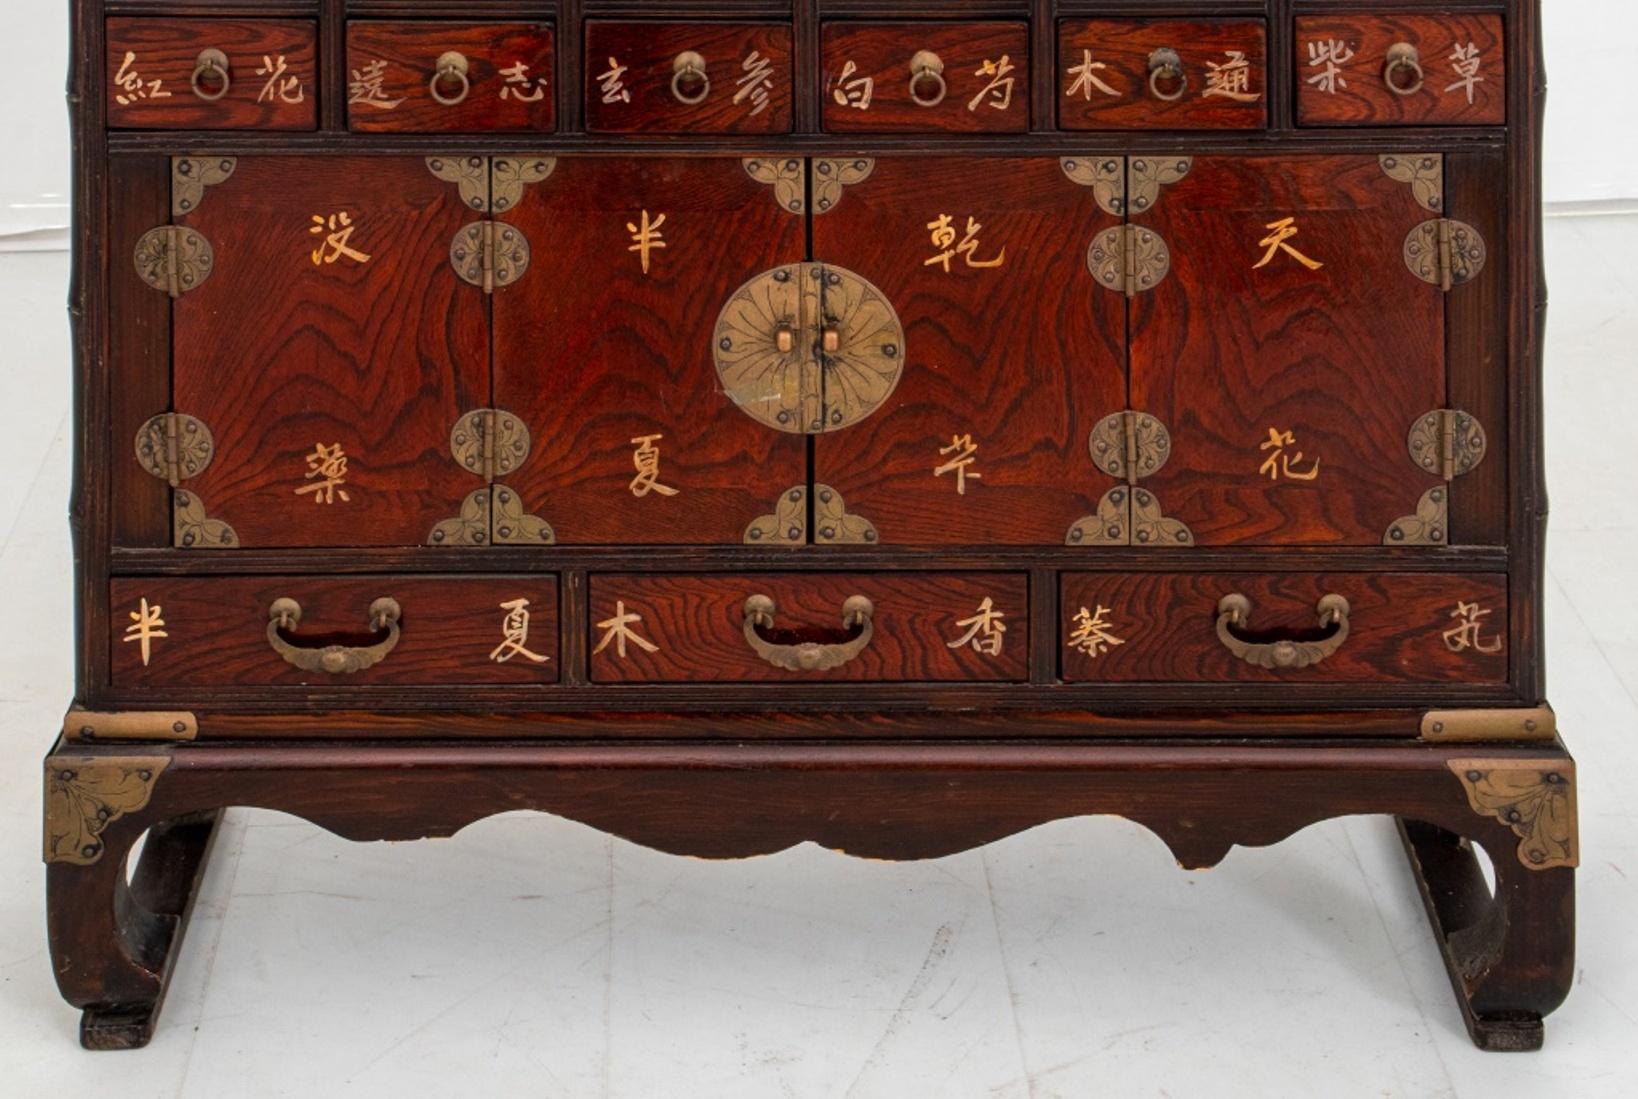 Korean apothecary or medicinal cabinet, 19th C or later, rectangular with winged top above thirty-six (36) labeled drawers and three cabinets on four shaped legs.

Dimensions: 34.5